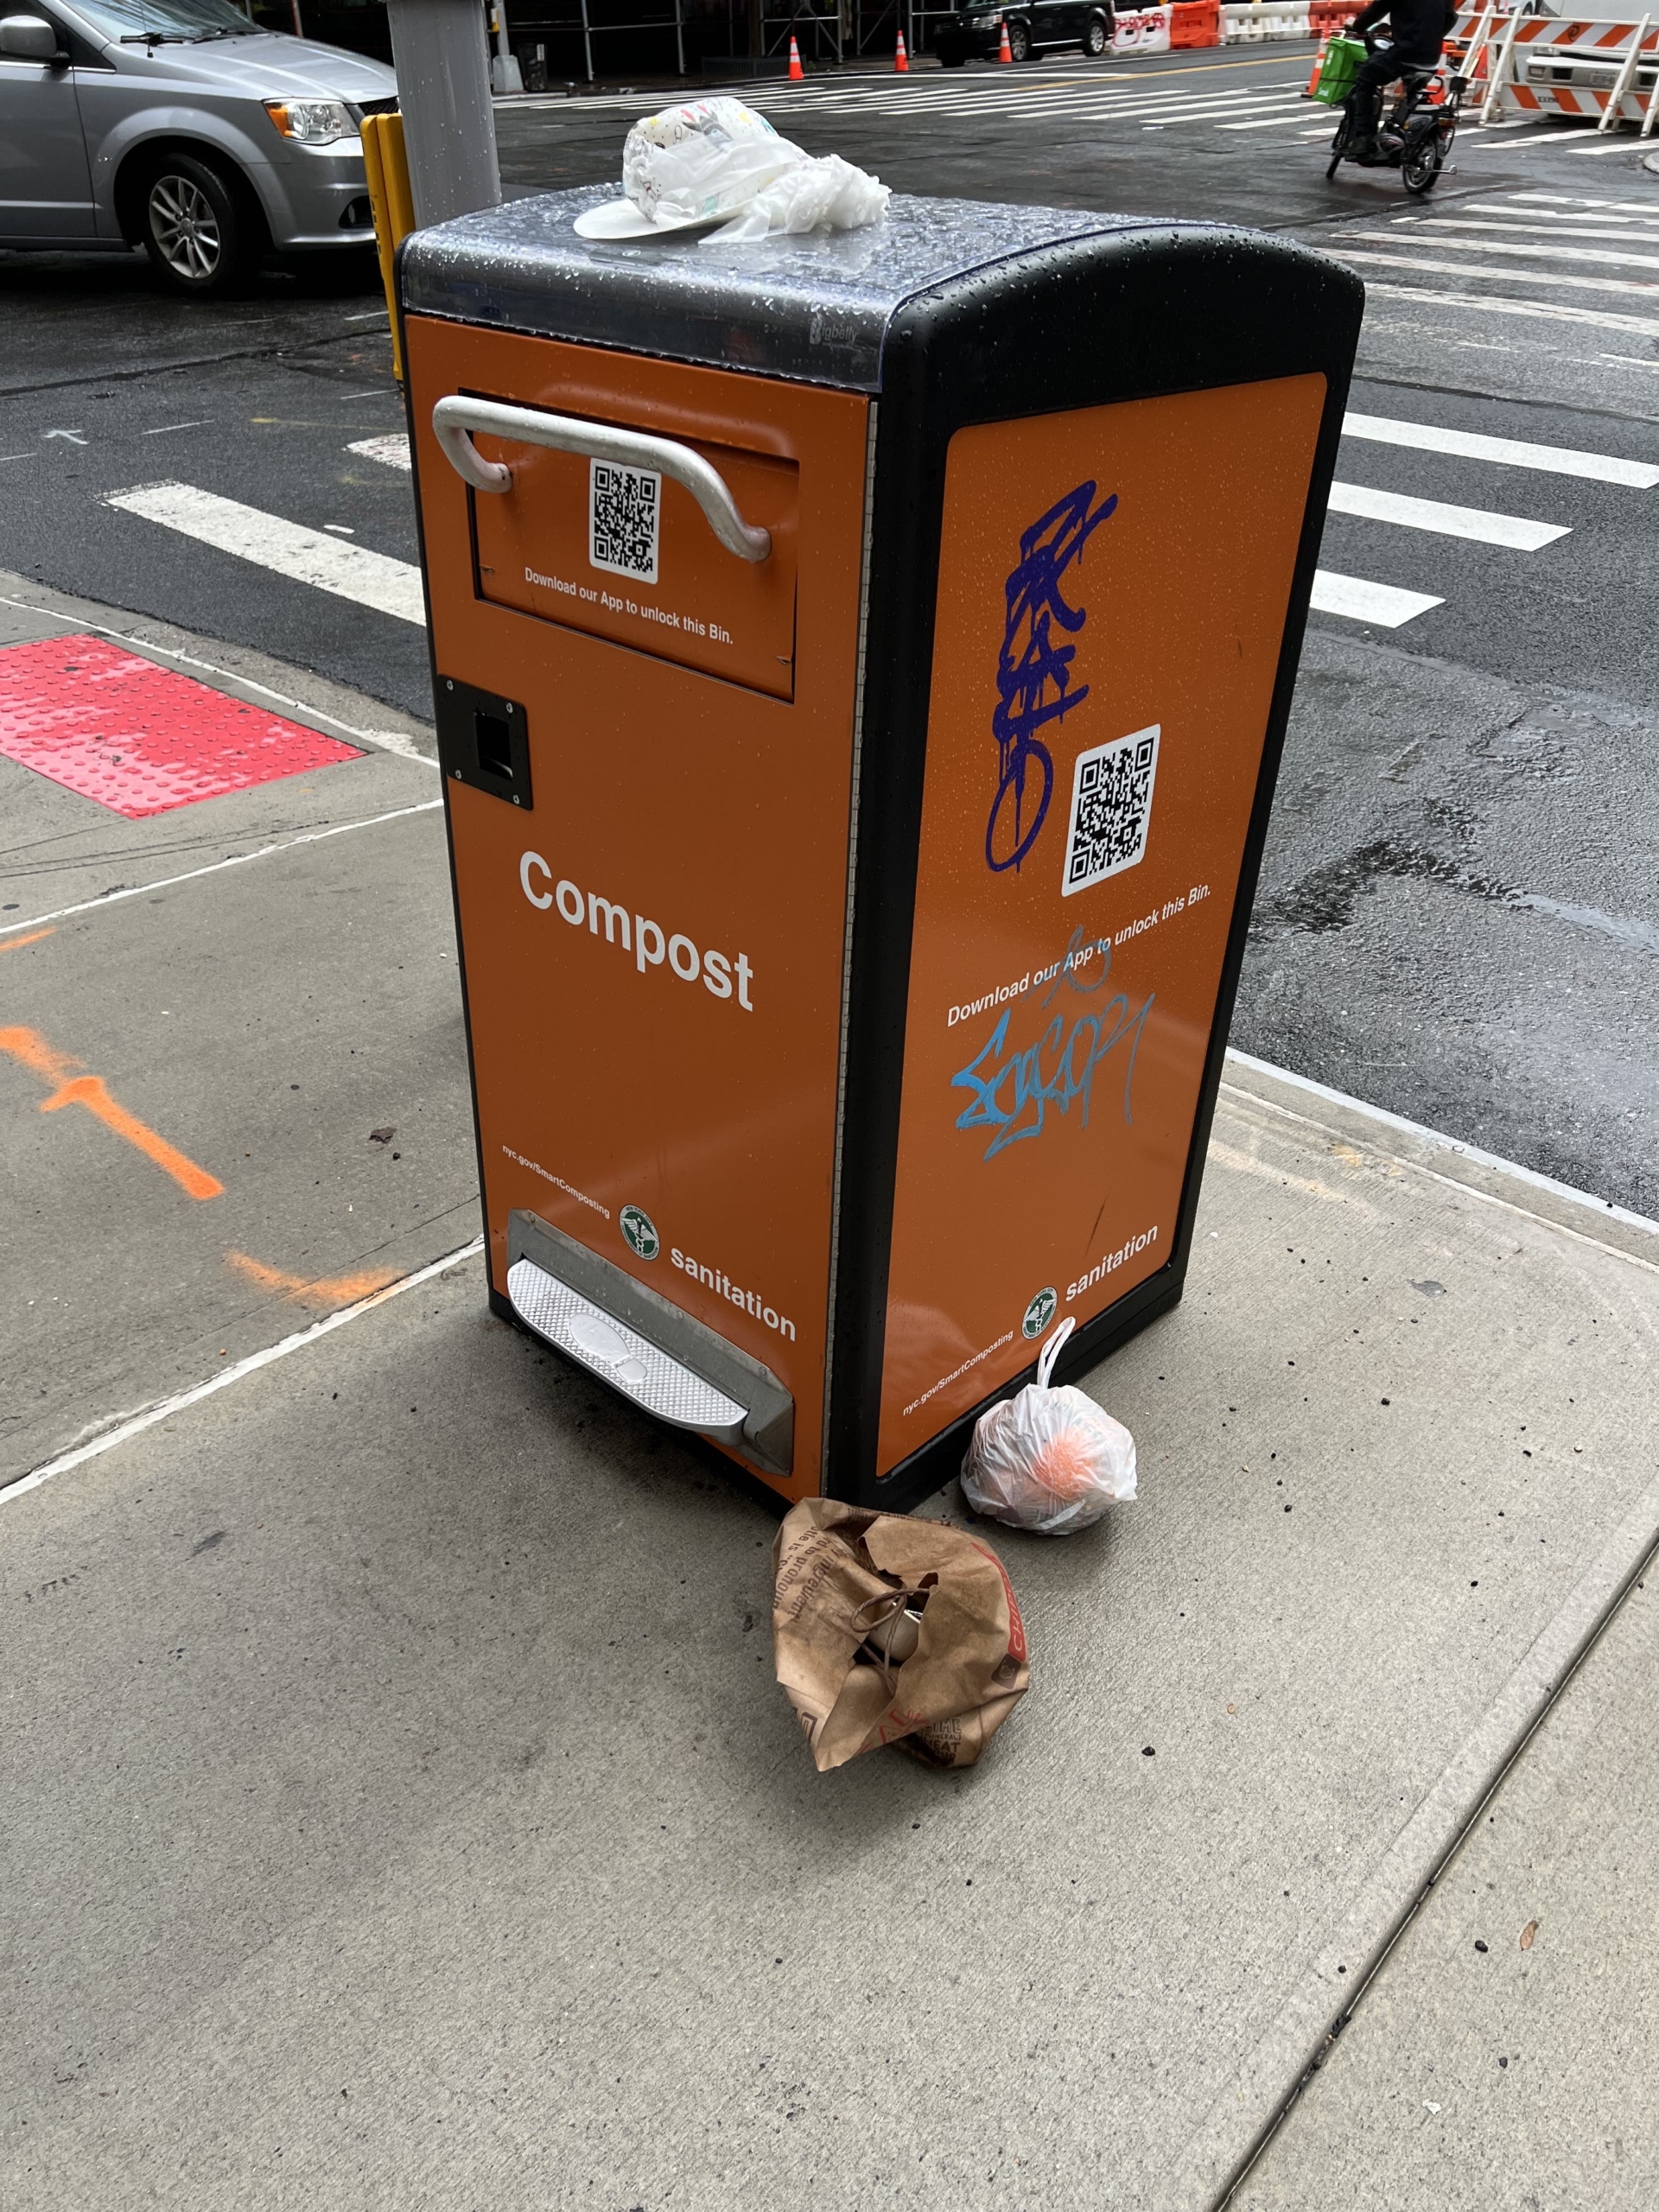 Smart Composting Bins Catching on With Upper West Siders